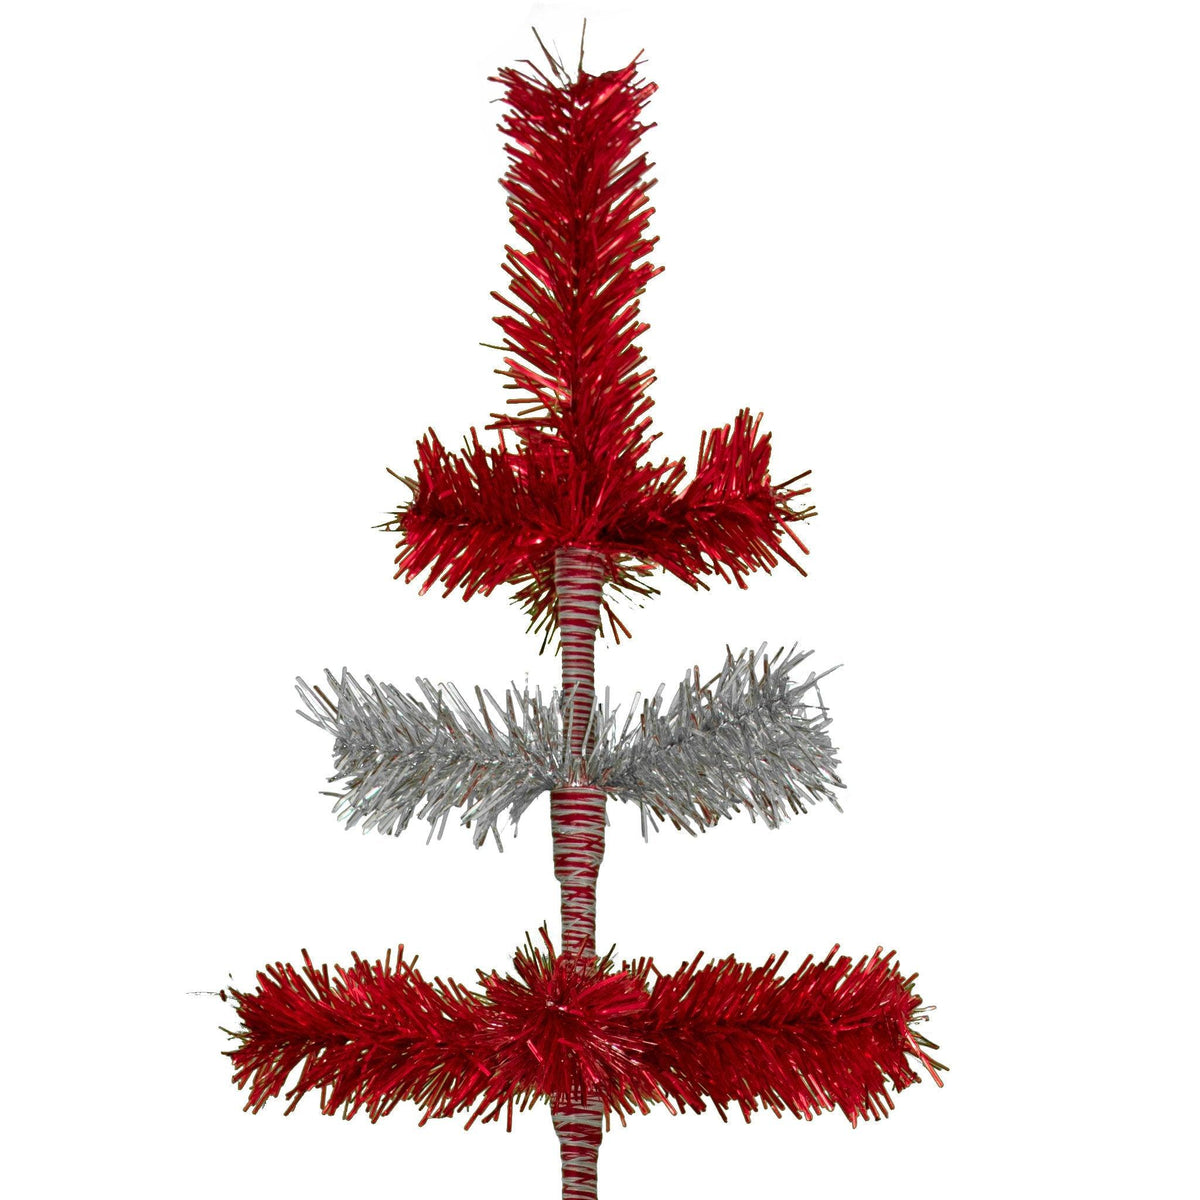 48in Tall Red & Silver Layered Tinsel Christmas Trees! Decorate for the holidays with a Shiny Red and Metallic Silver retro-style Christmas Tree. On sale now at leedisplay.com